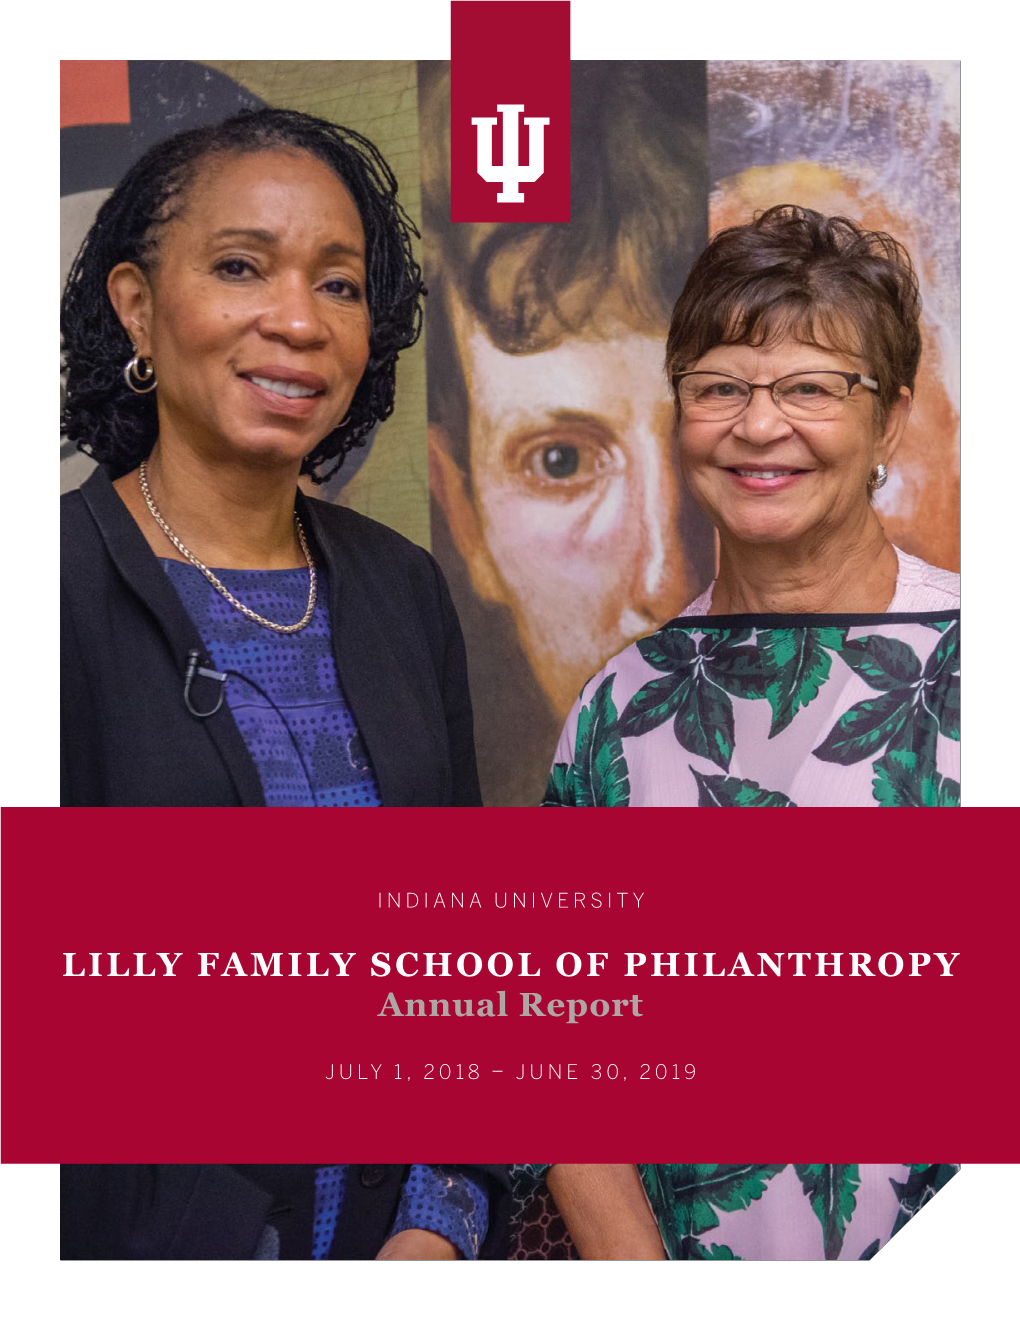 Indiana University Lilly Family School of Philanthropy Annual Report 2018-19